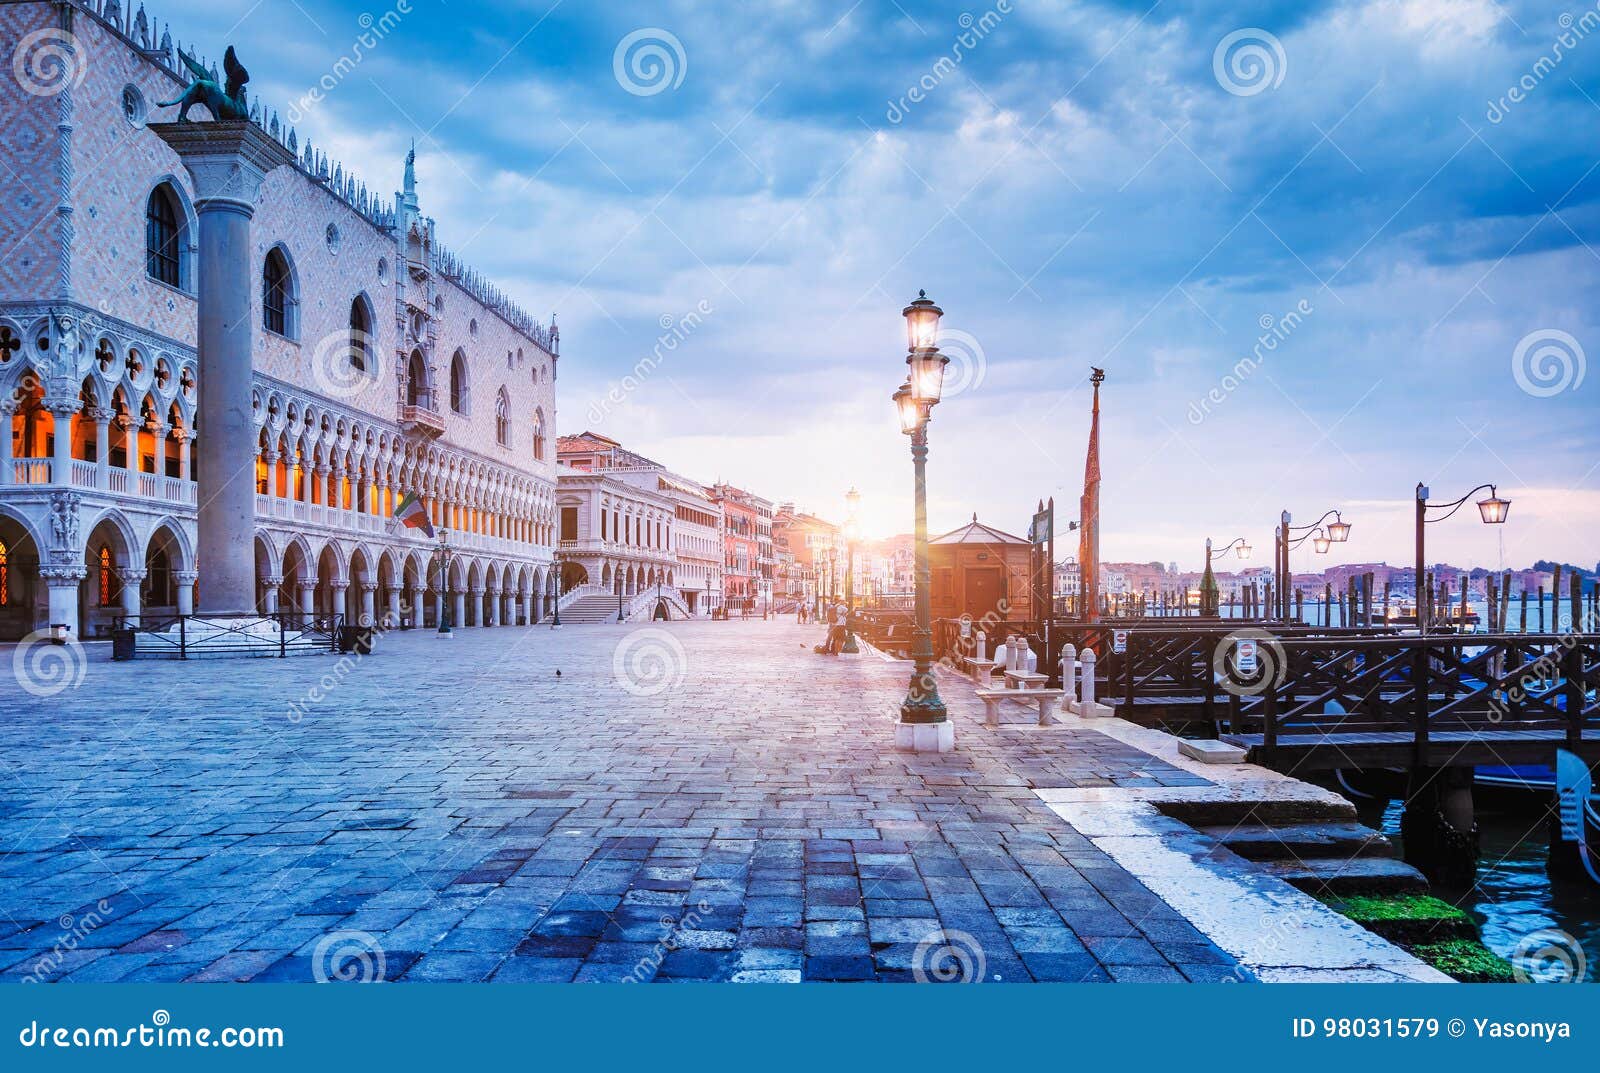 ducal palace on piazza san marco venice